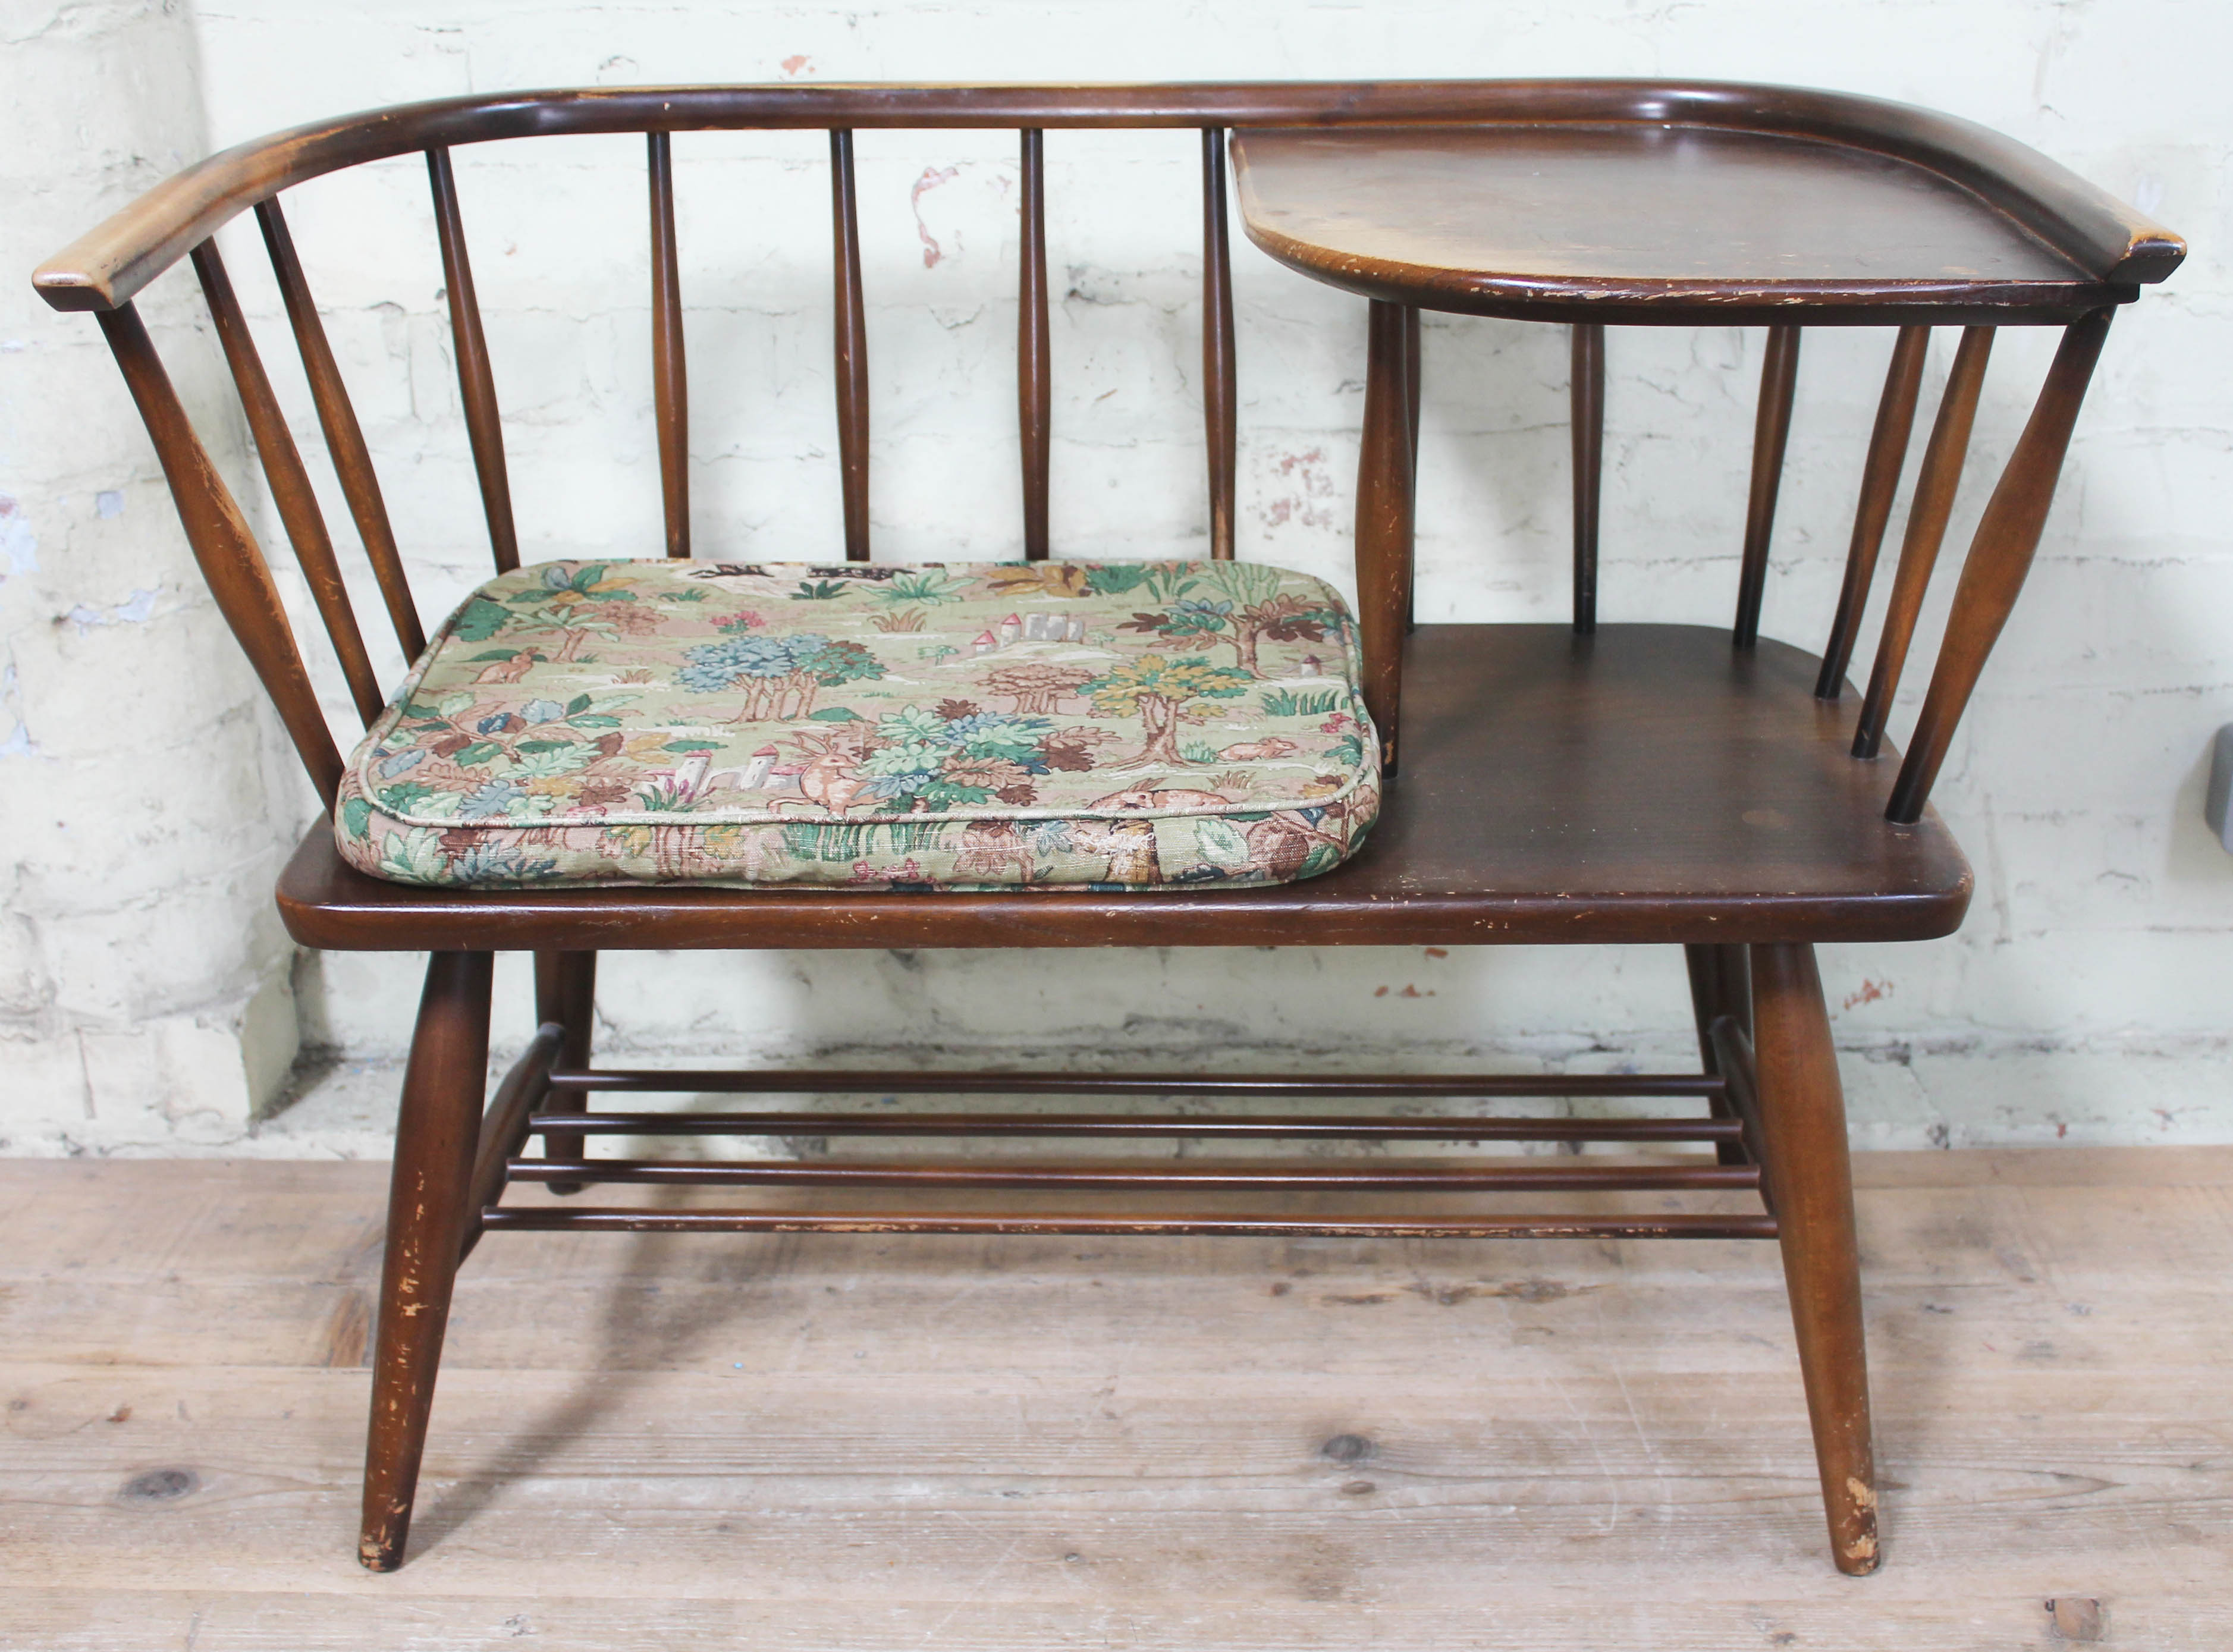 An Ercol dark elm and beech telephone seat, length 87cm. Condition - appears damage/repair free,